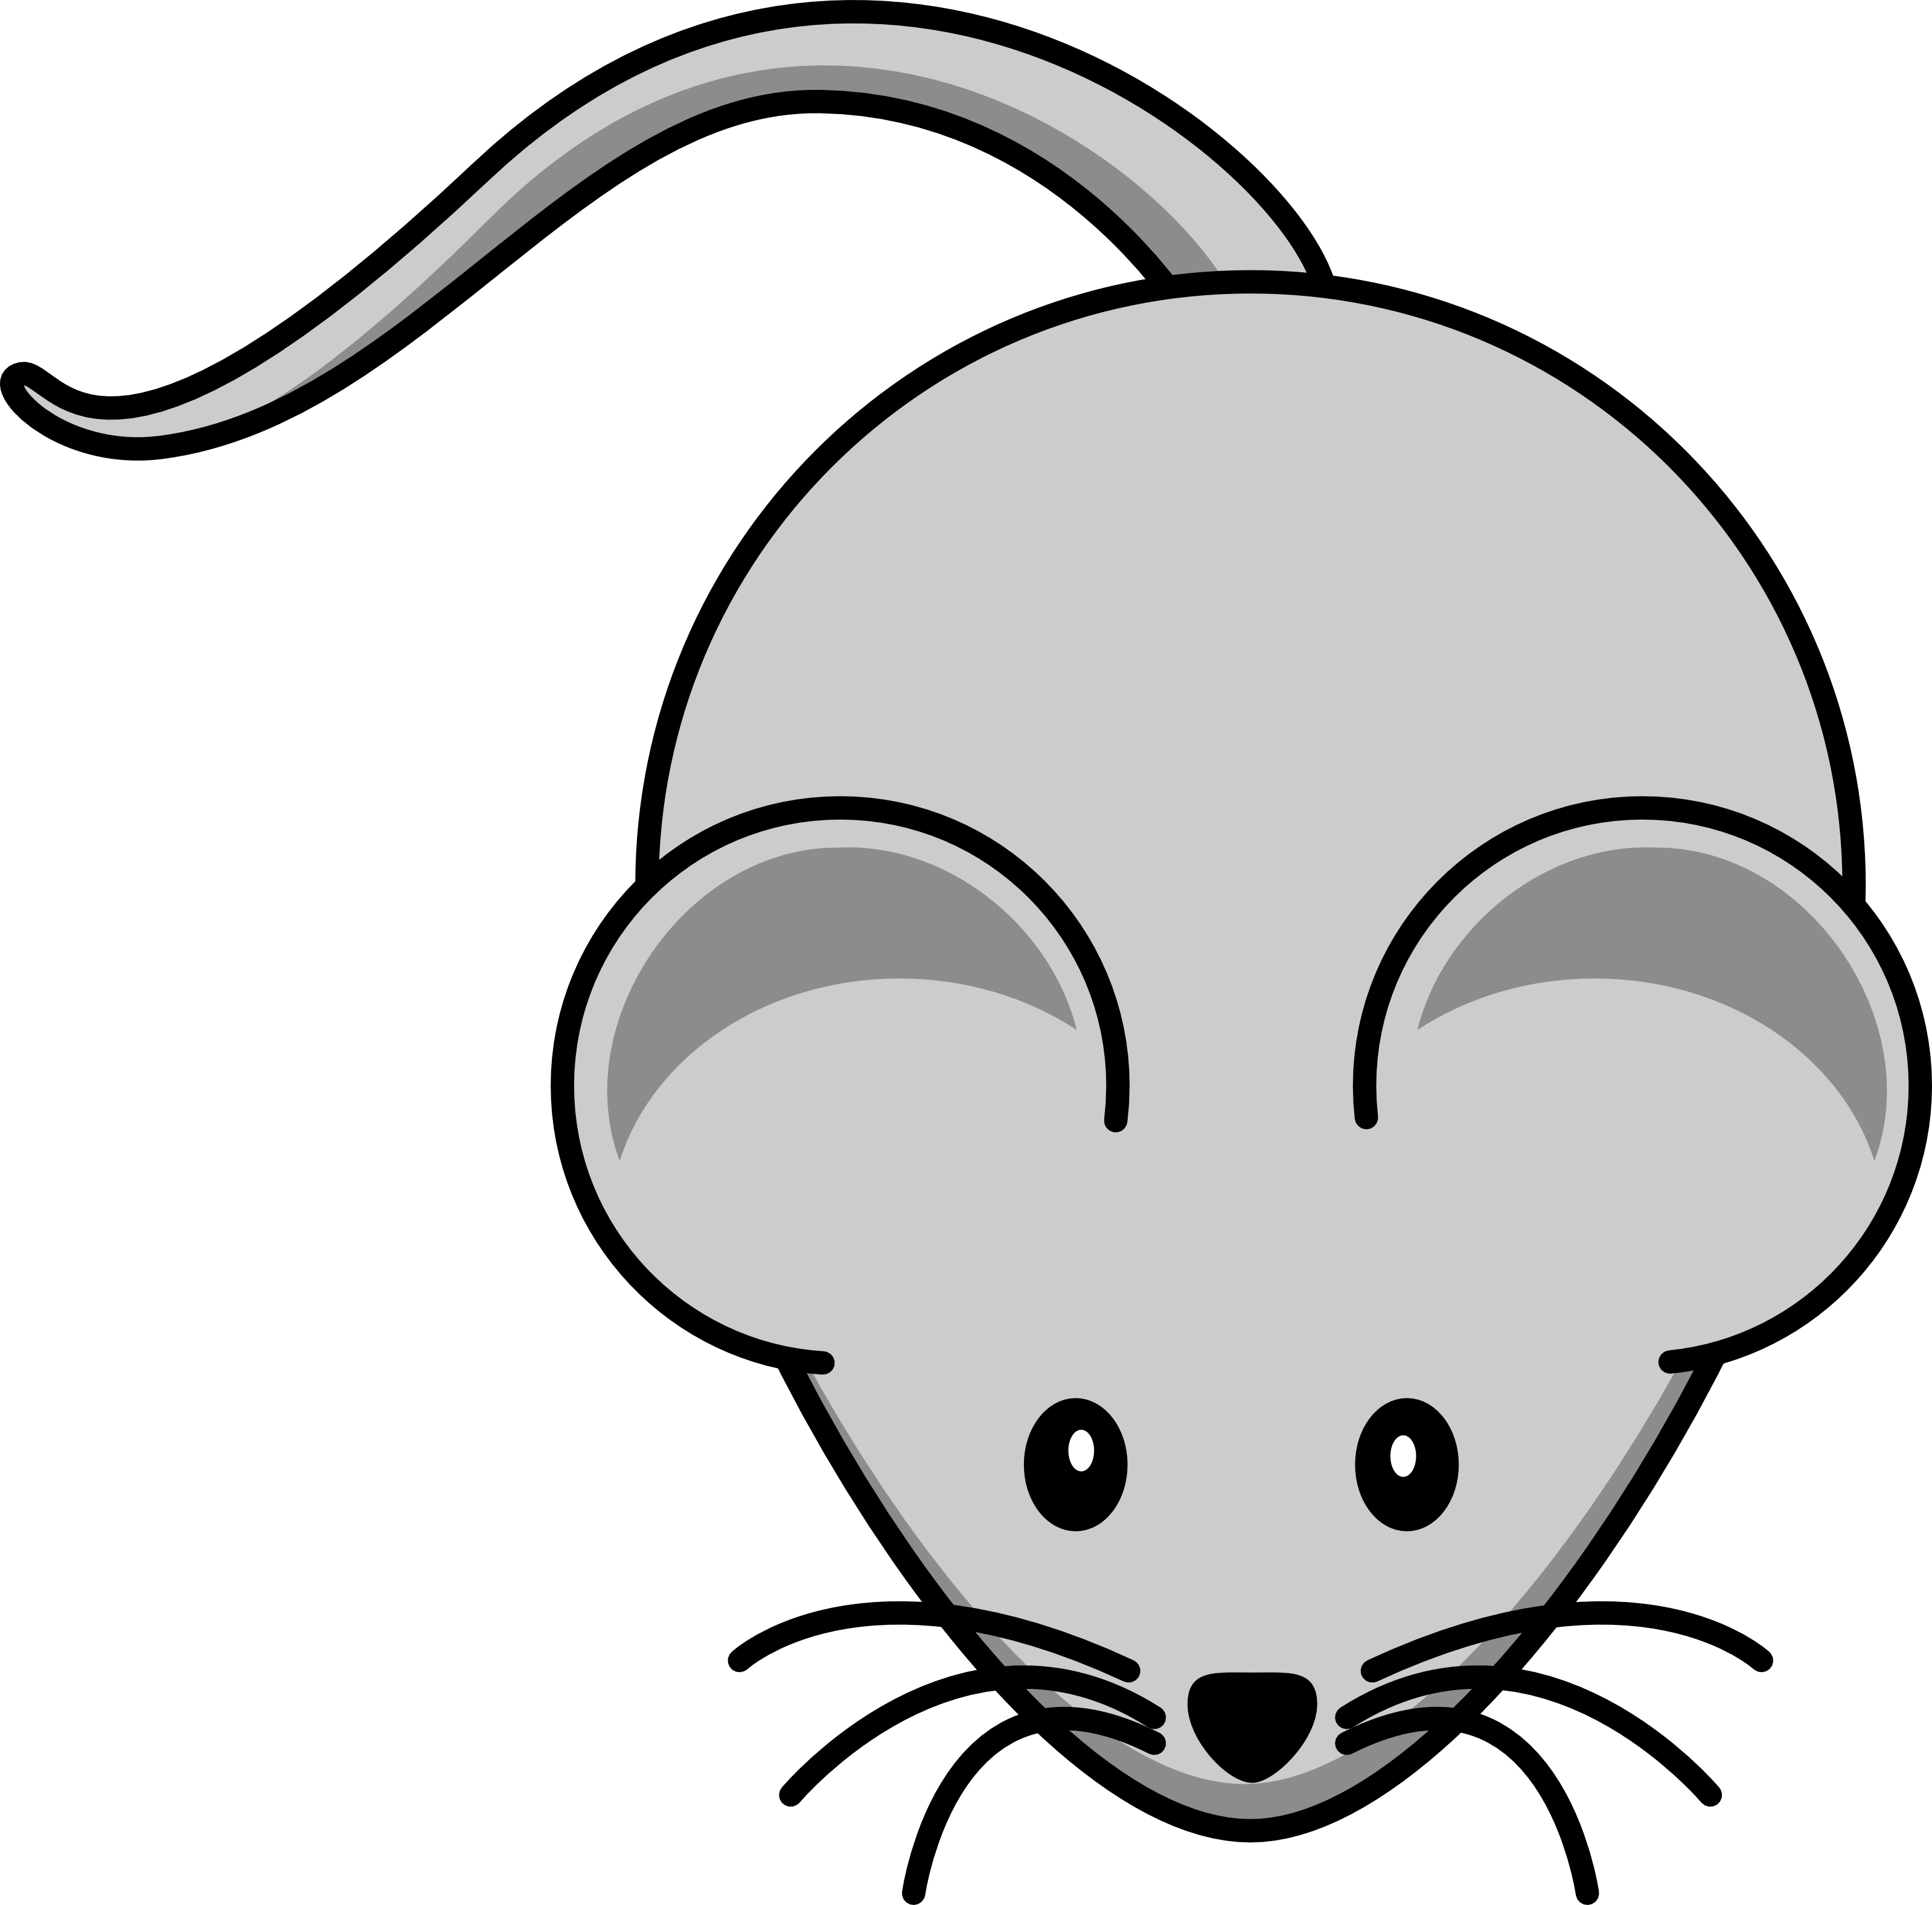 Computer mouse clipart black and white free - Cliparting.com